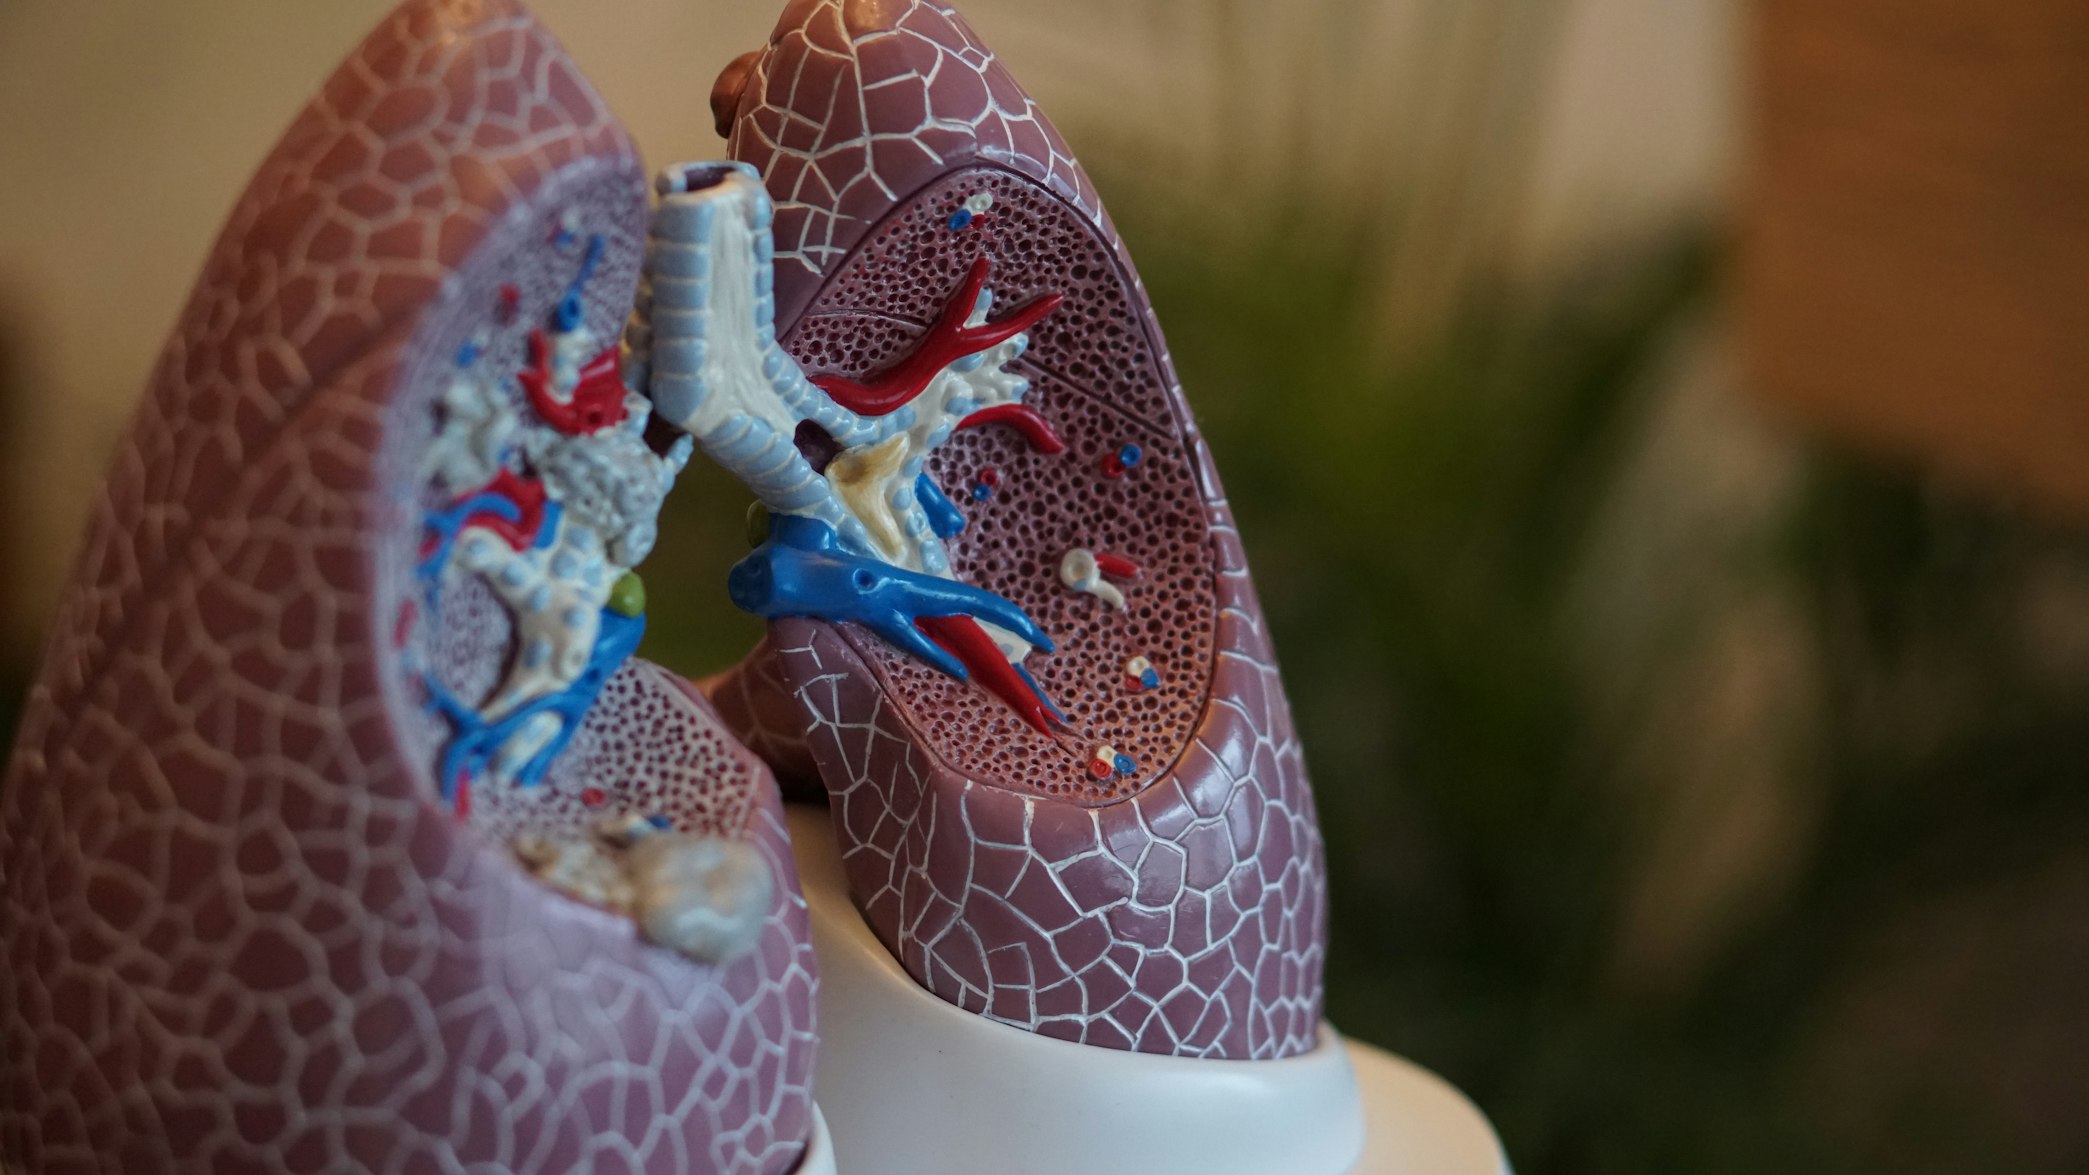 Plastic model of lungs